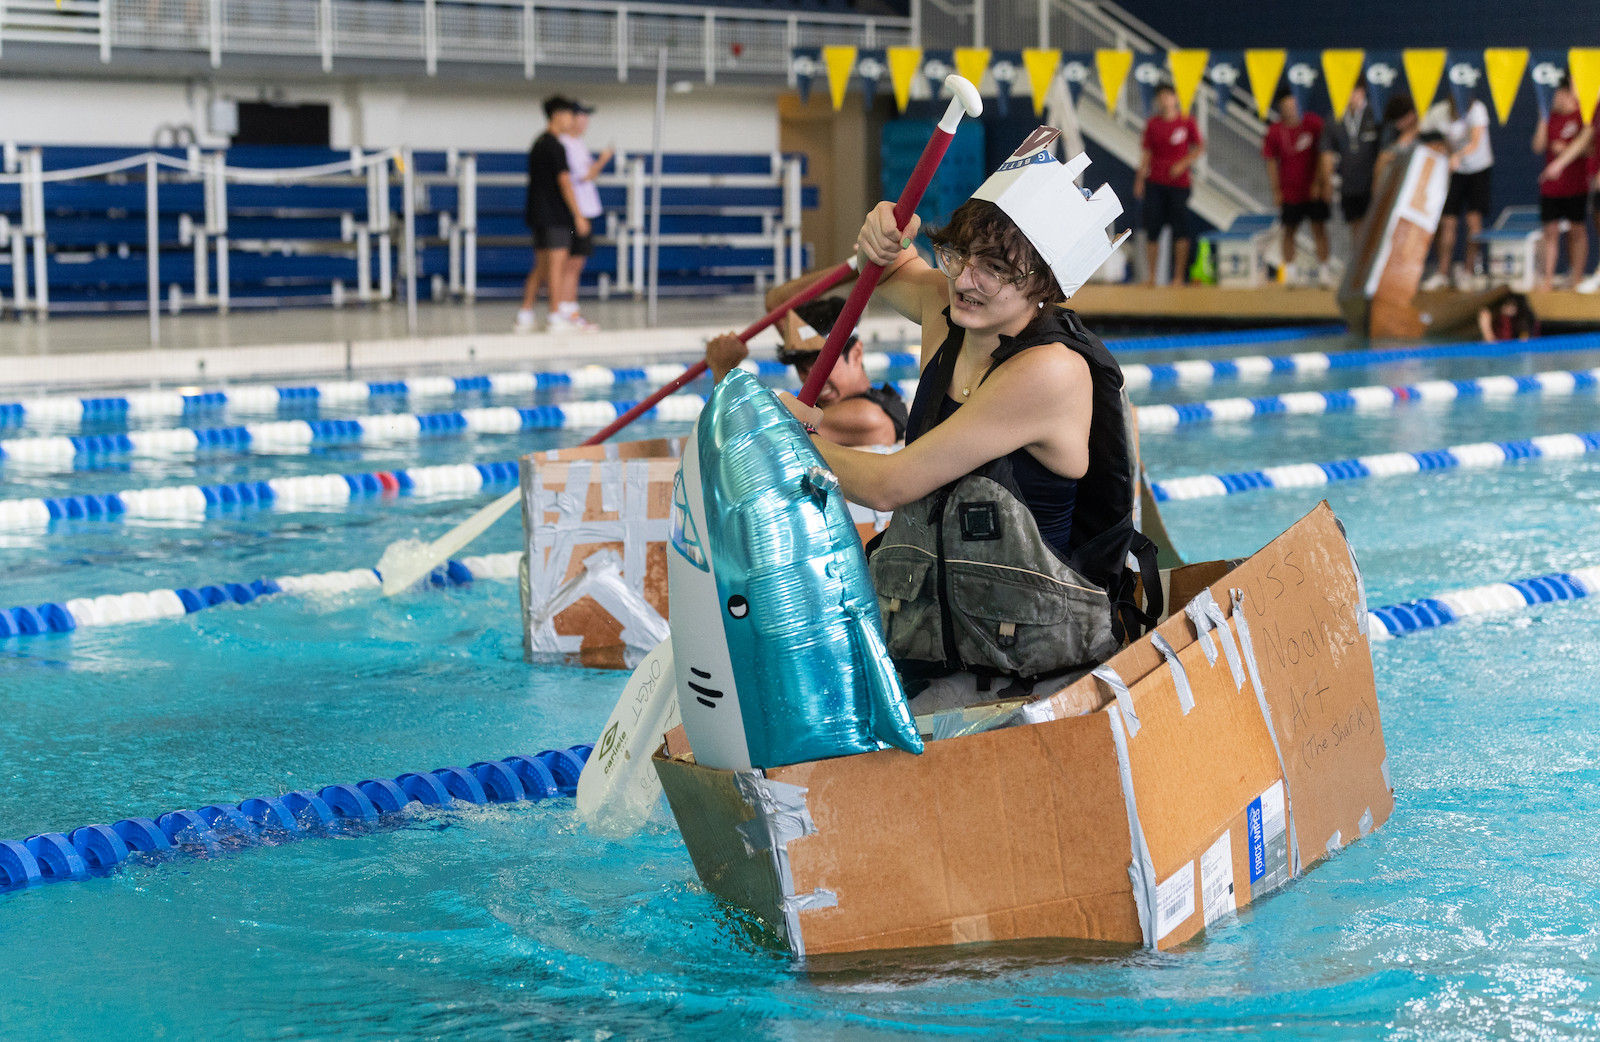 Great Cardboard Boat Race at the Aquatic Center